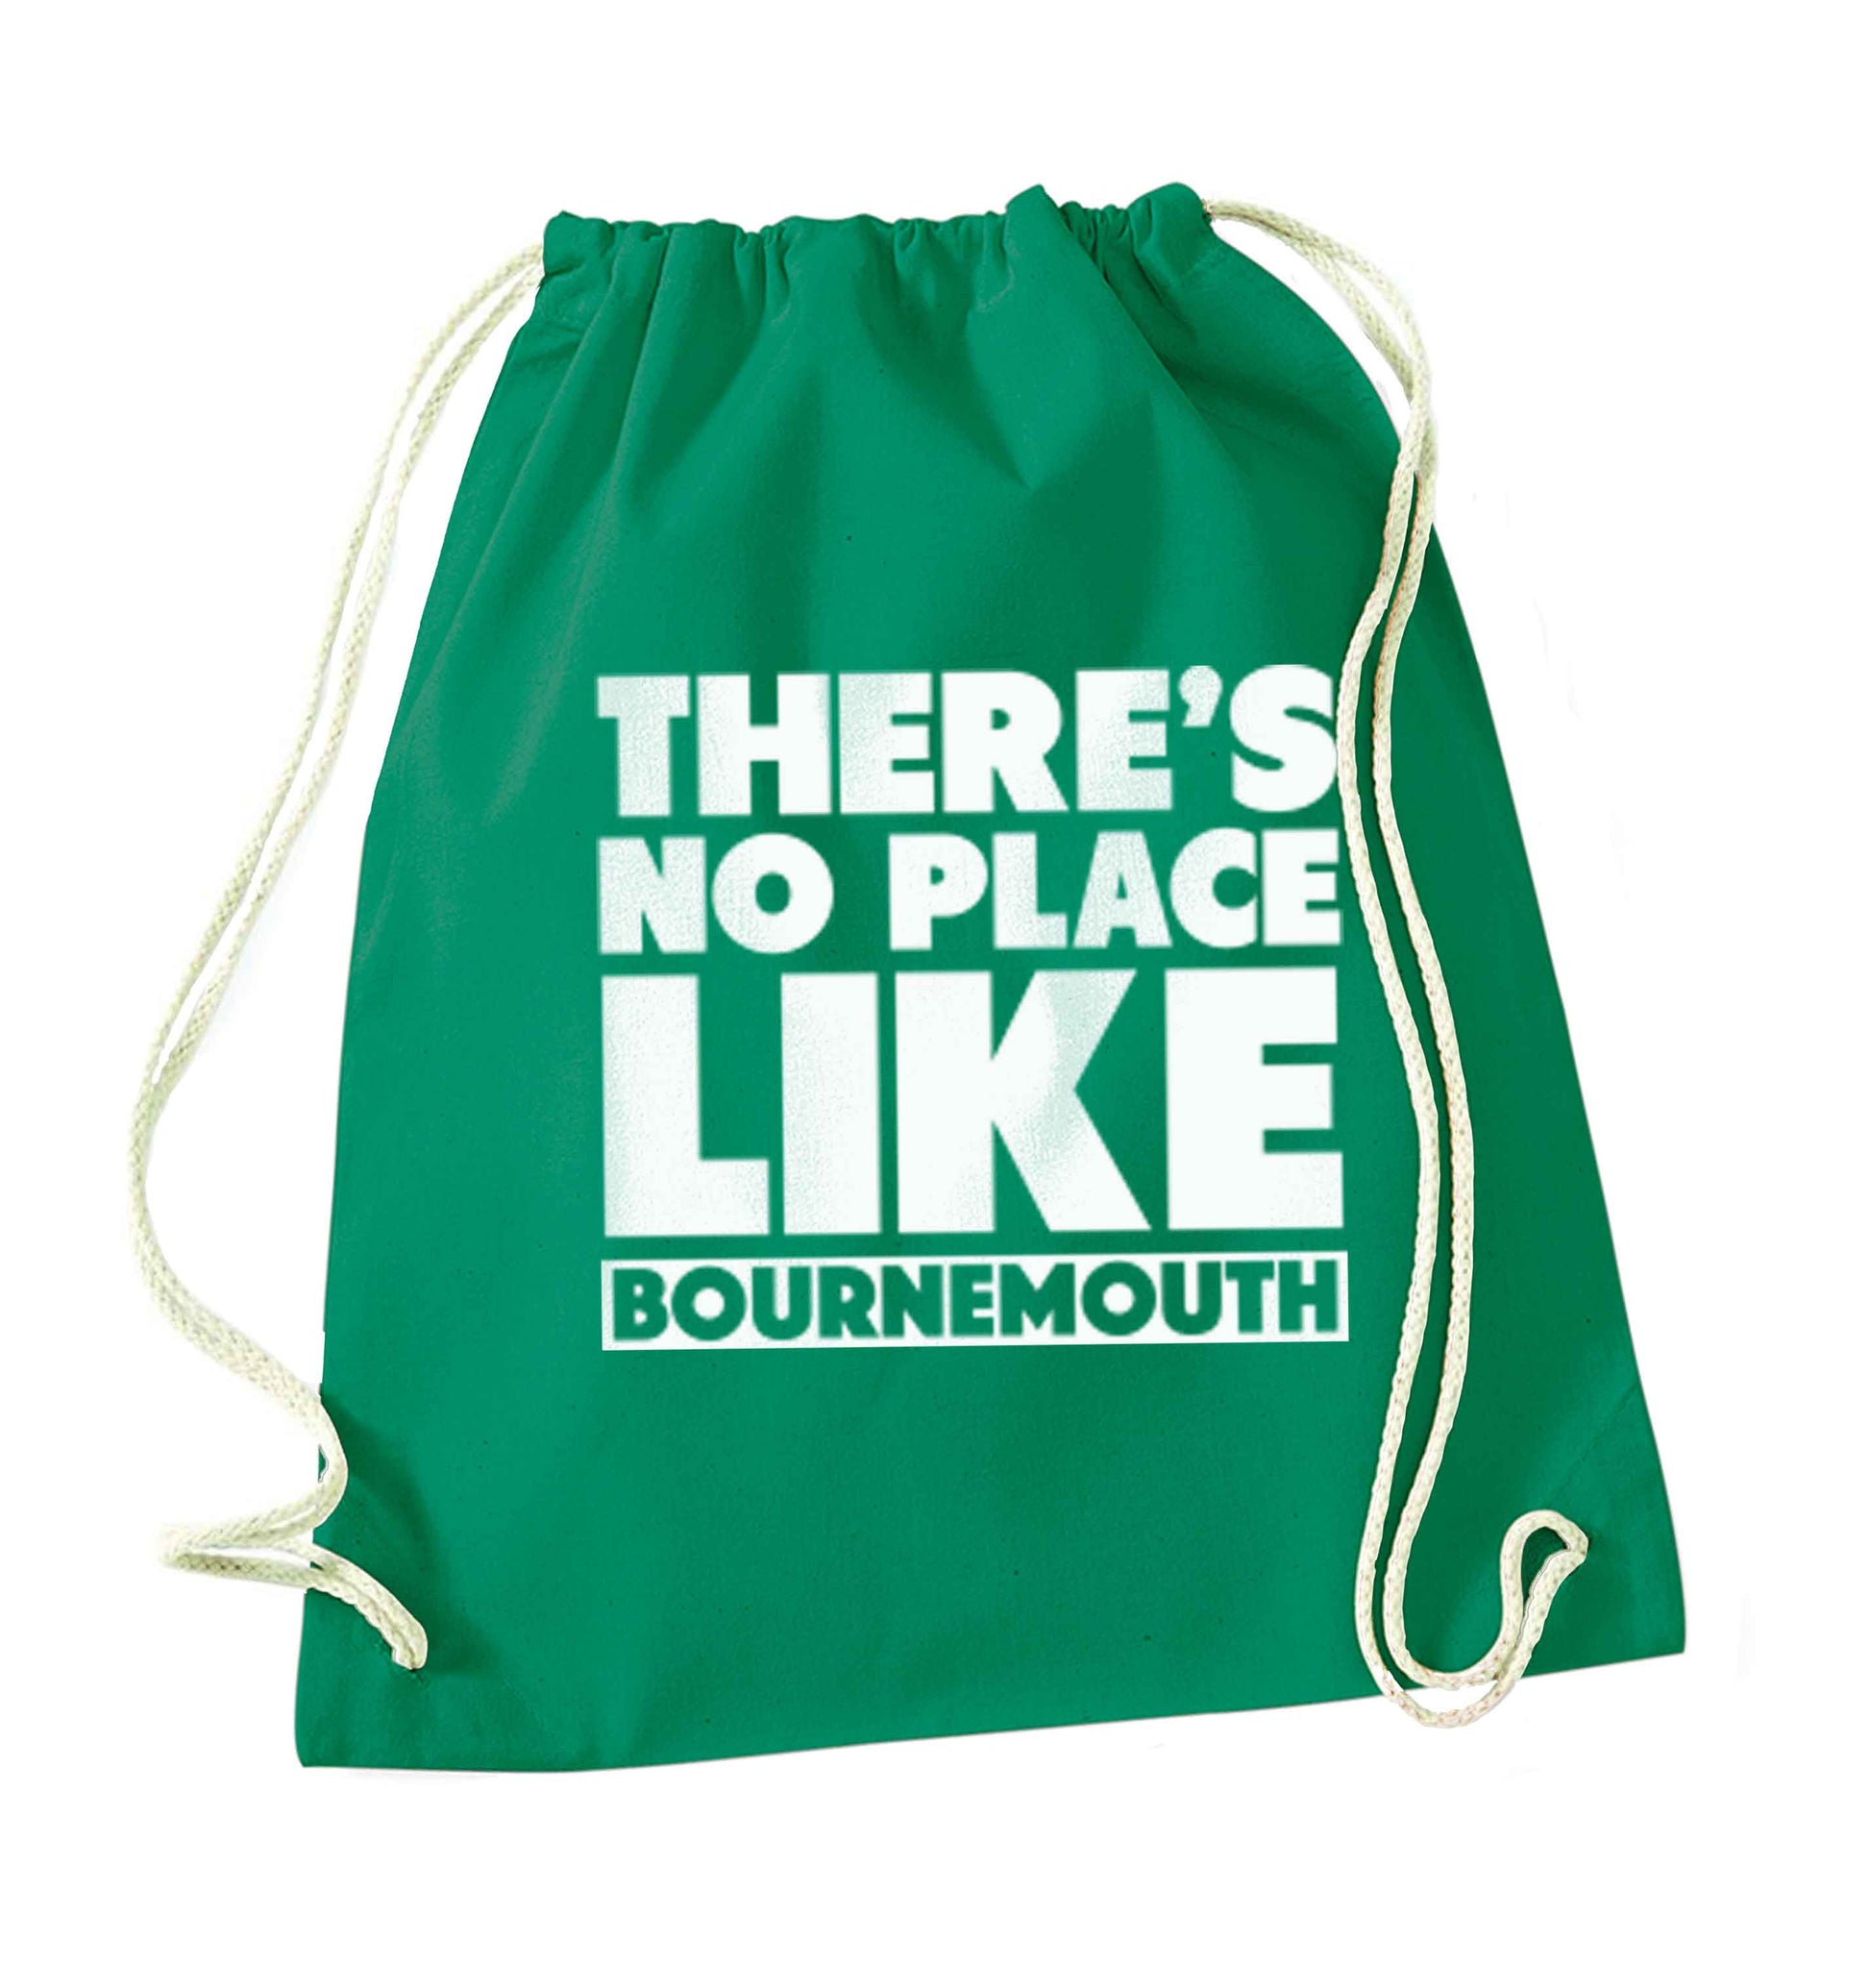 There's no place like Bournemouth green drawstring bag